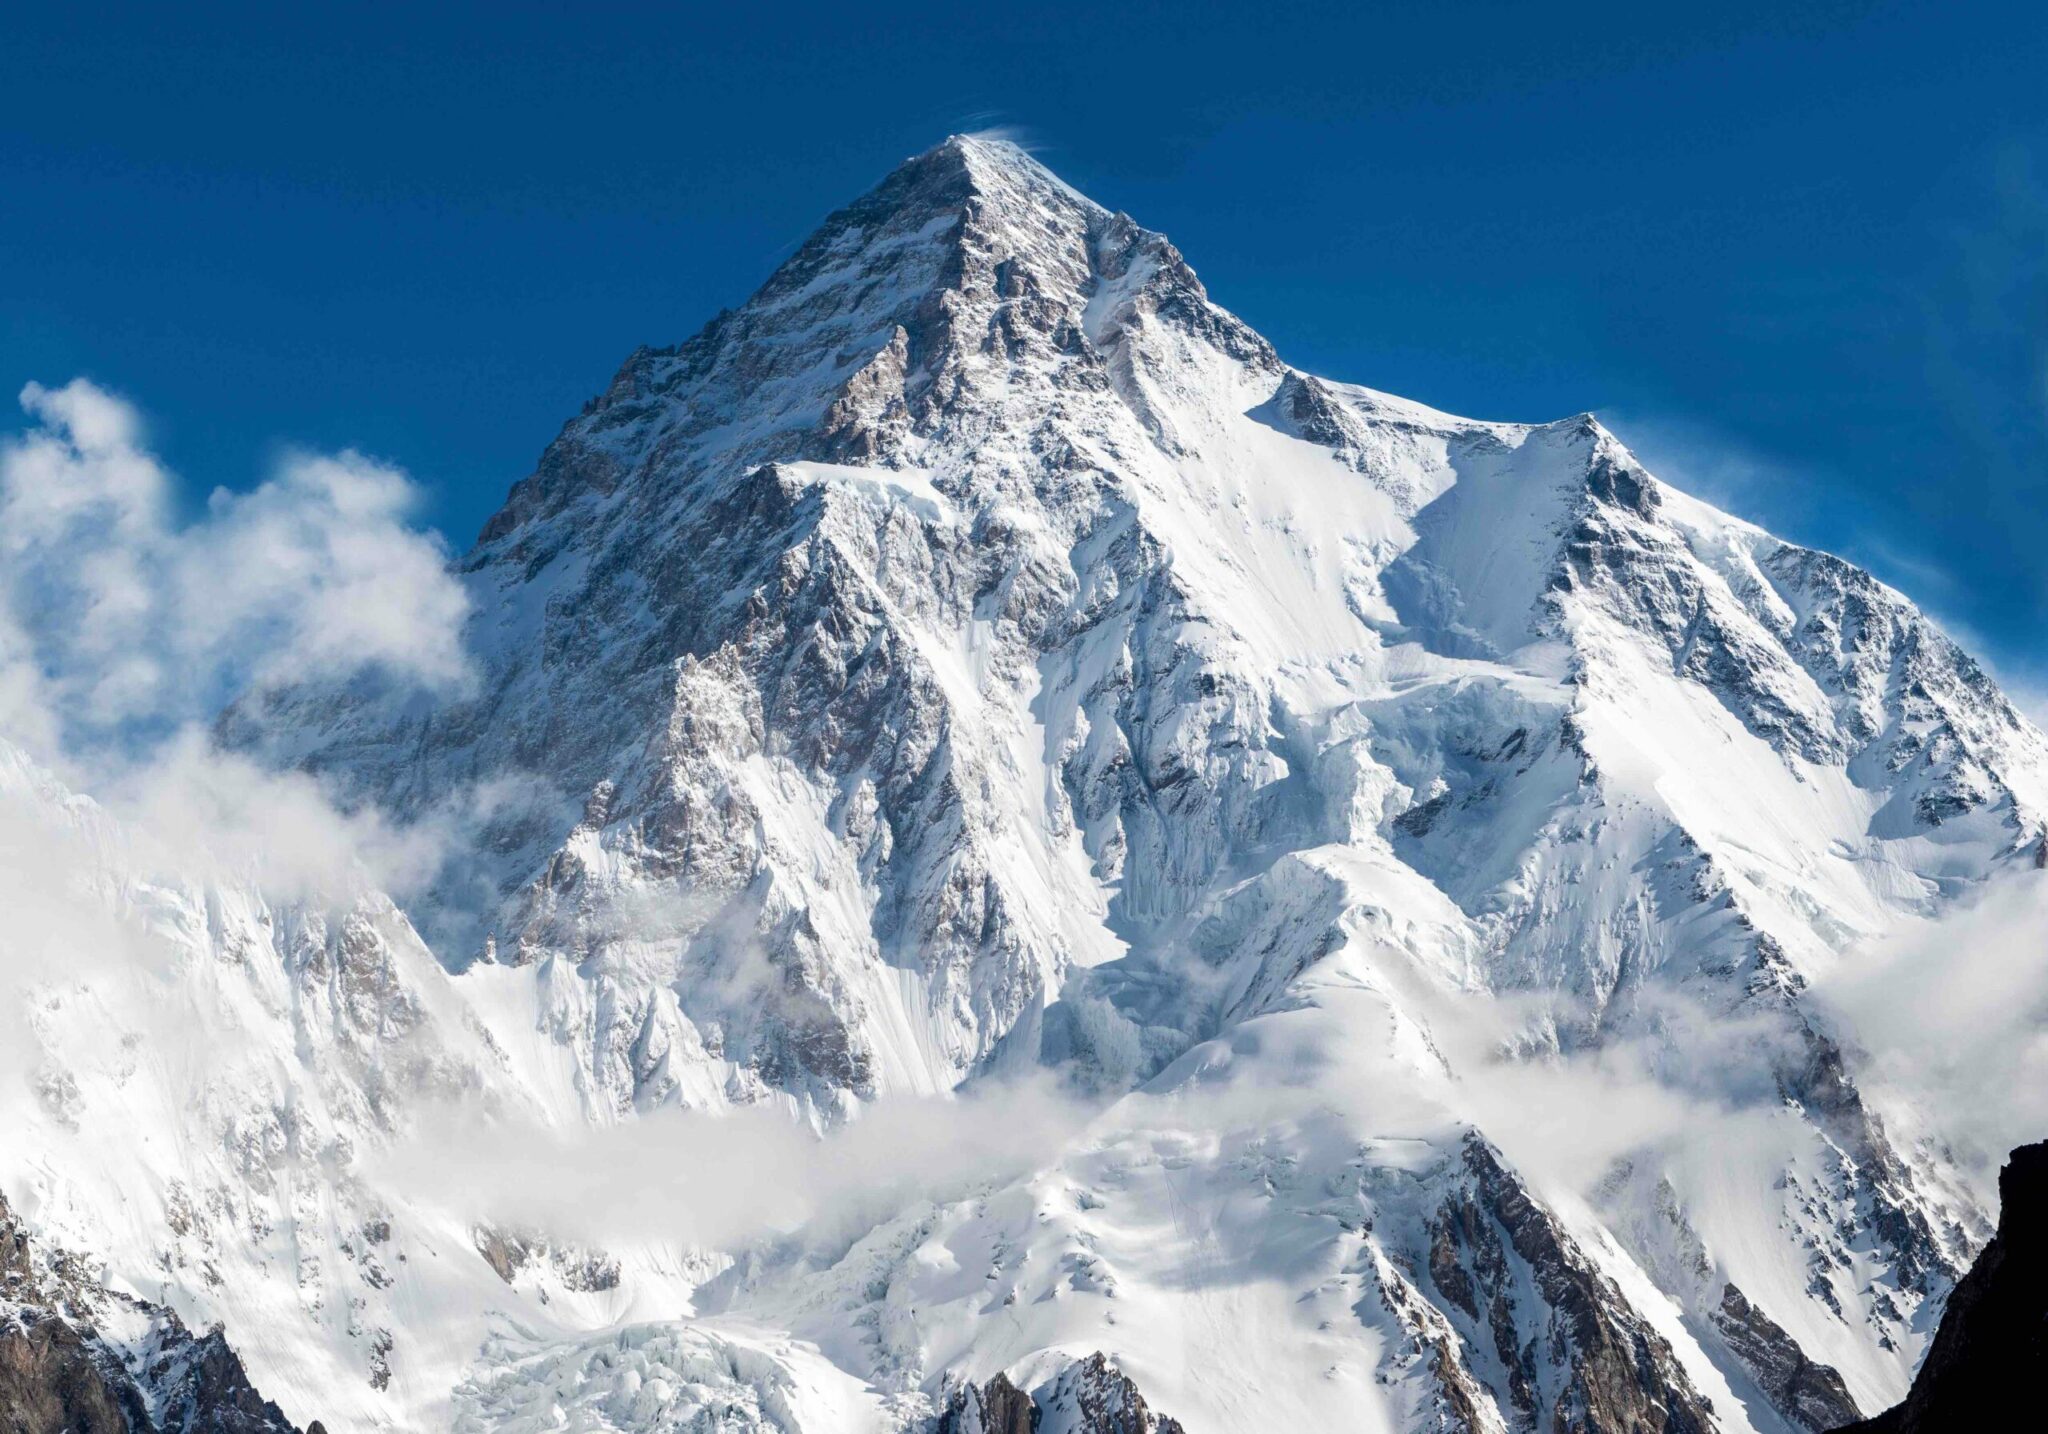 what is the tallest mountain in the world and what is the second tallest mountain in the world scaled